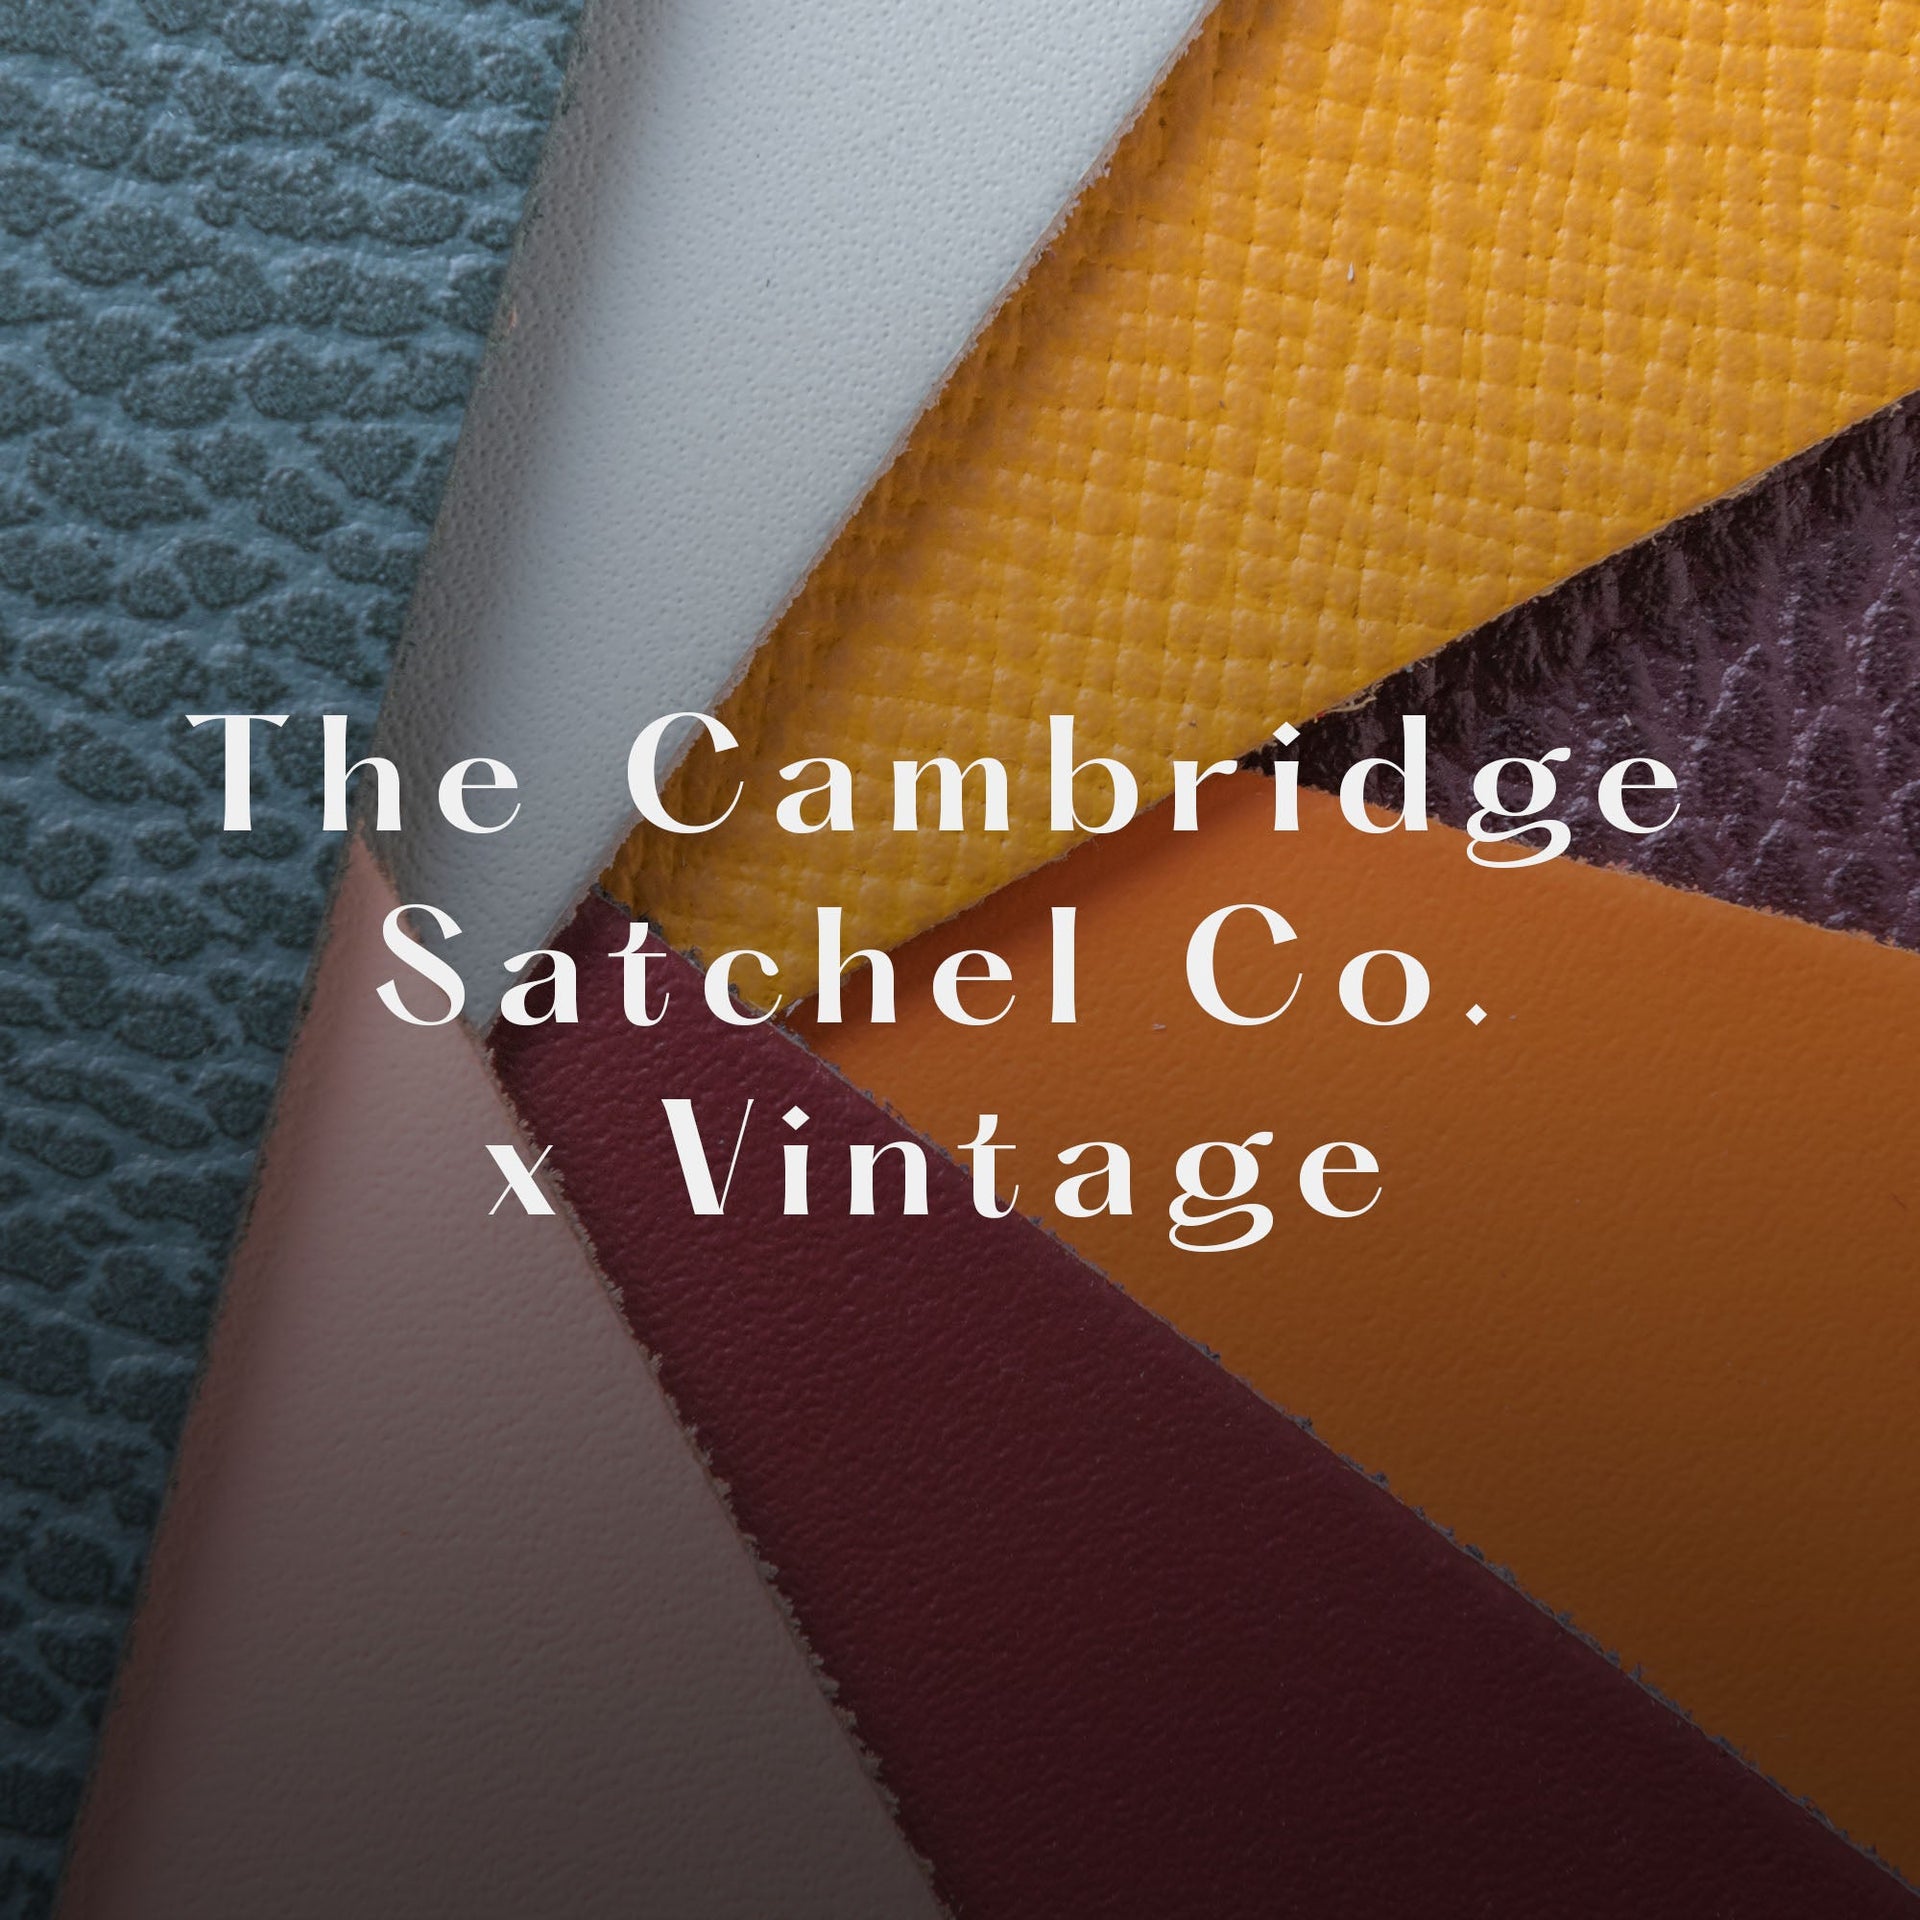 CSC x Vintage: The Handmaid's Tale by Margaret Atwood - Cambridge Satchel